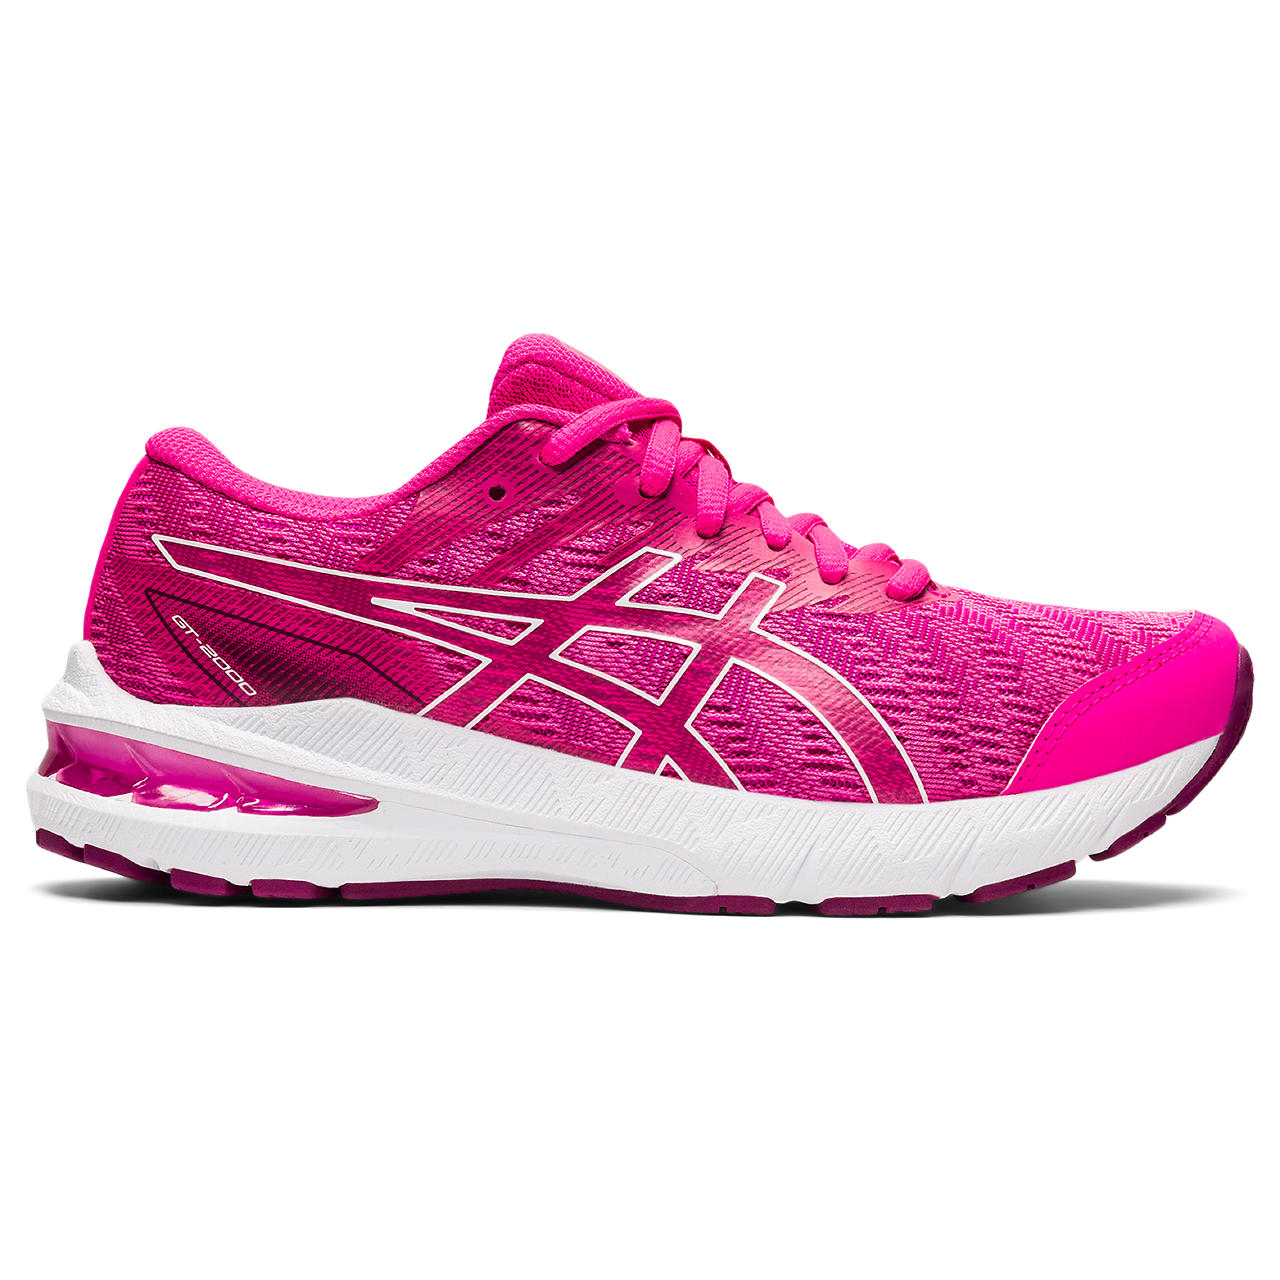 ASICS GT-2000 10 GS, PINK GLO/WHITE, swatch